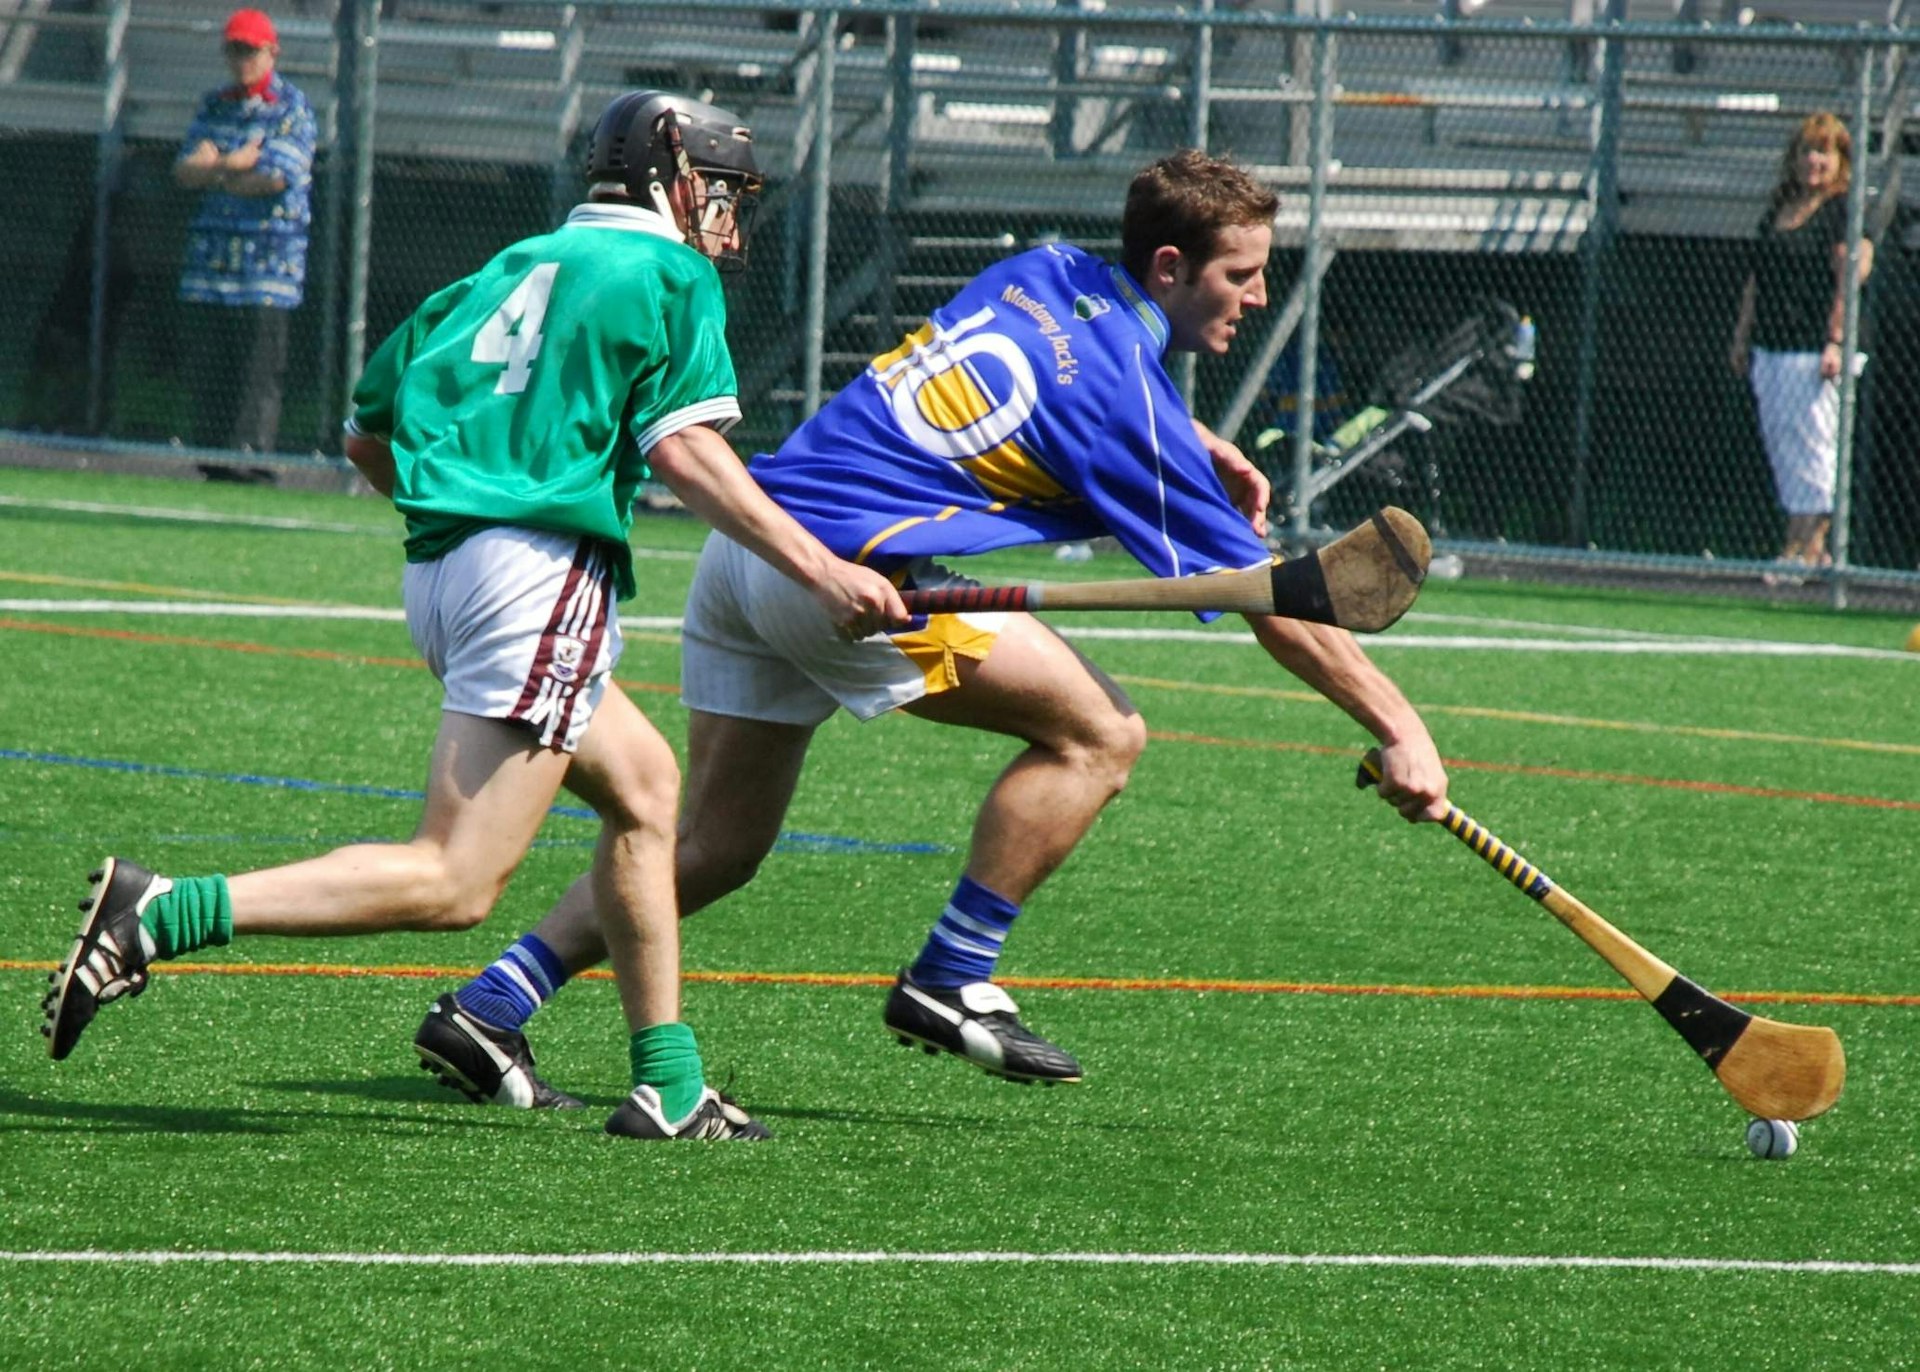 A hurling player in blue and gold gets to the sliotar in front of a green shirted player on a bright sunny day in Ireland